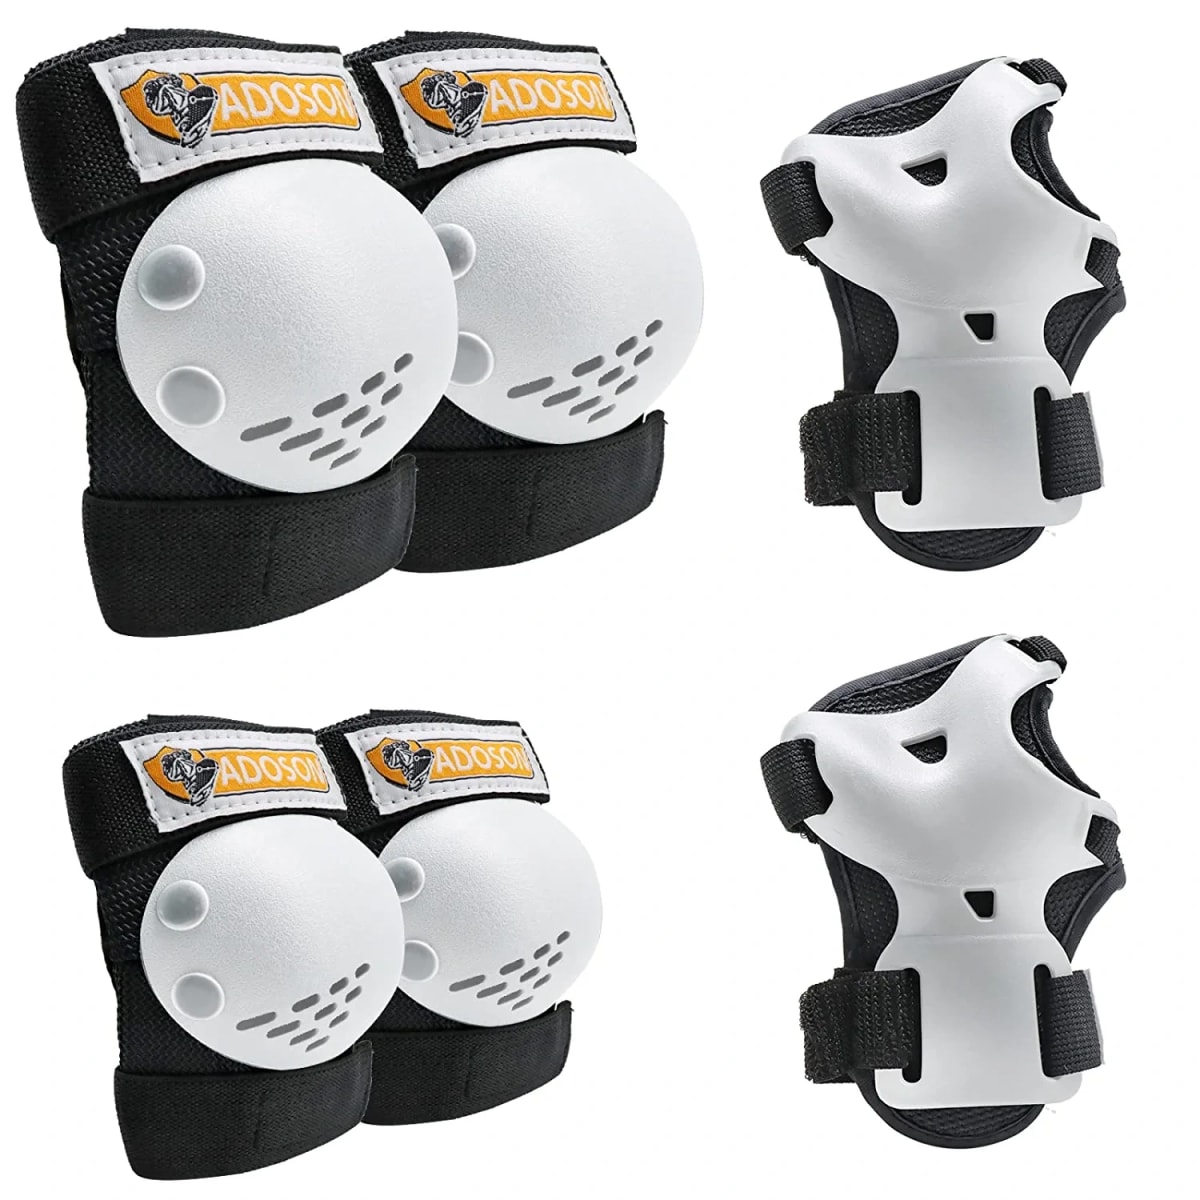 Toddler Knee Pads and Elbow Pads for Girls & Boys